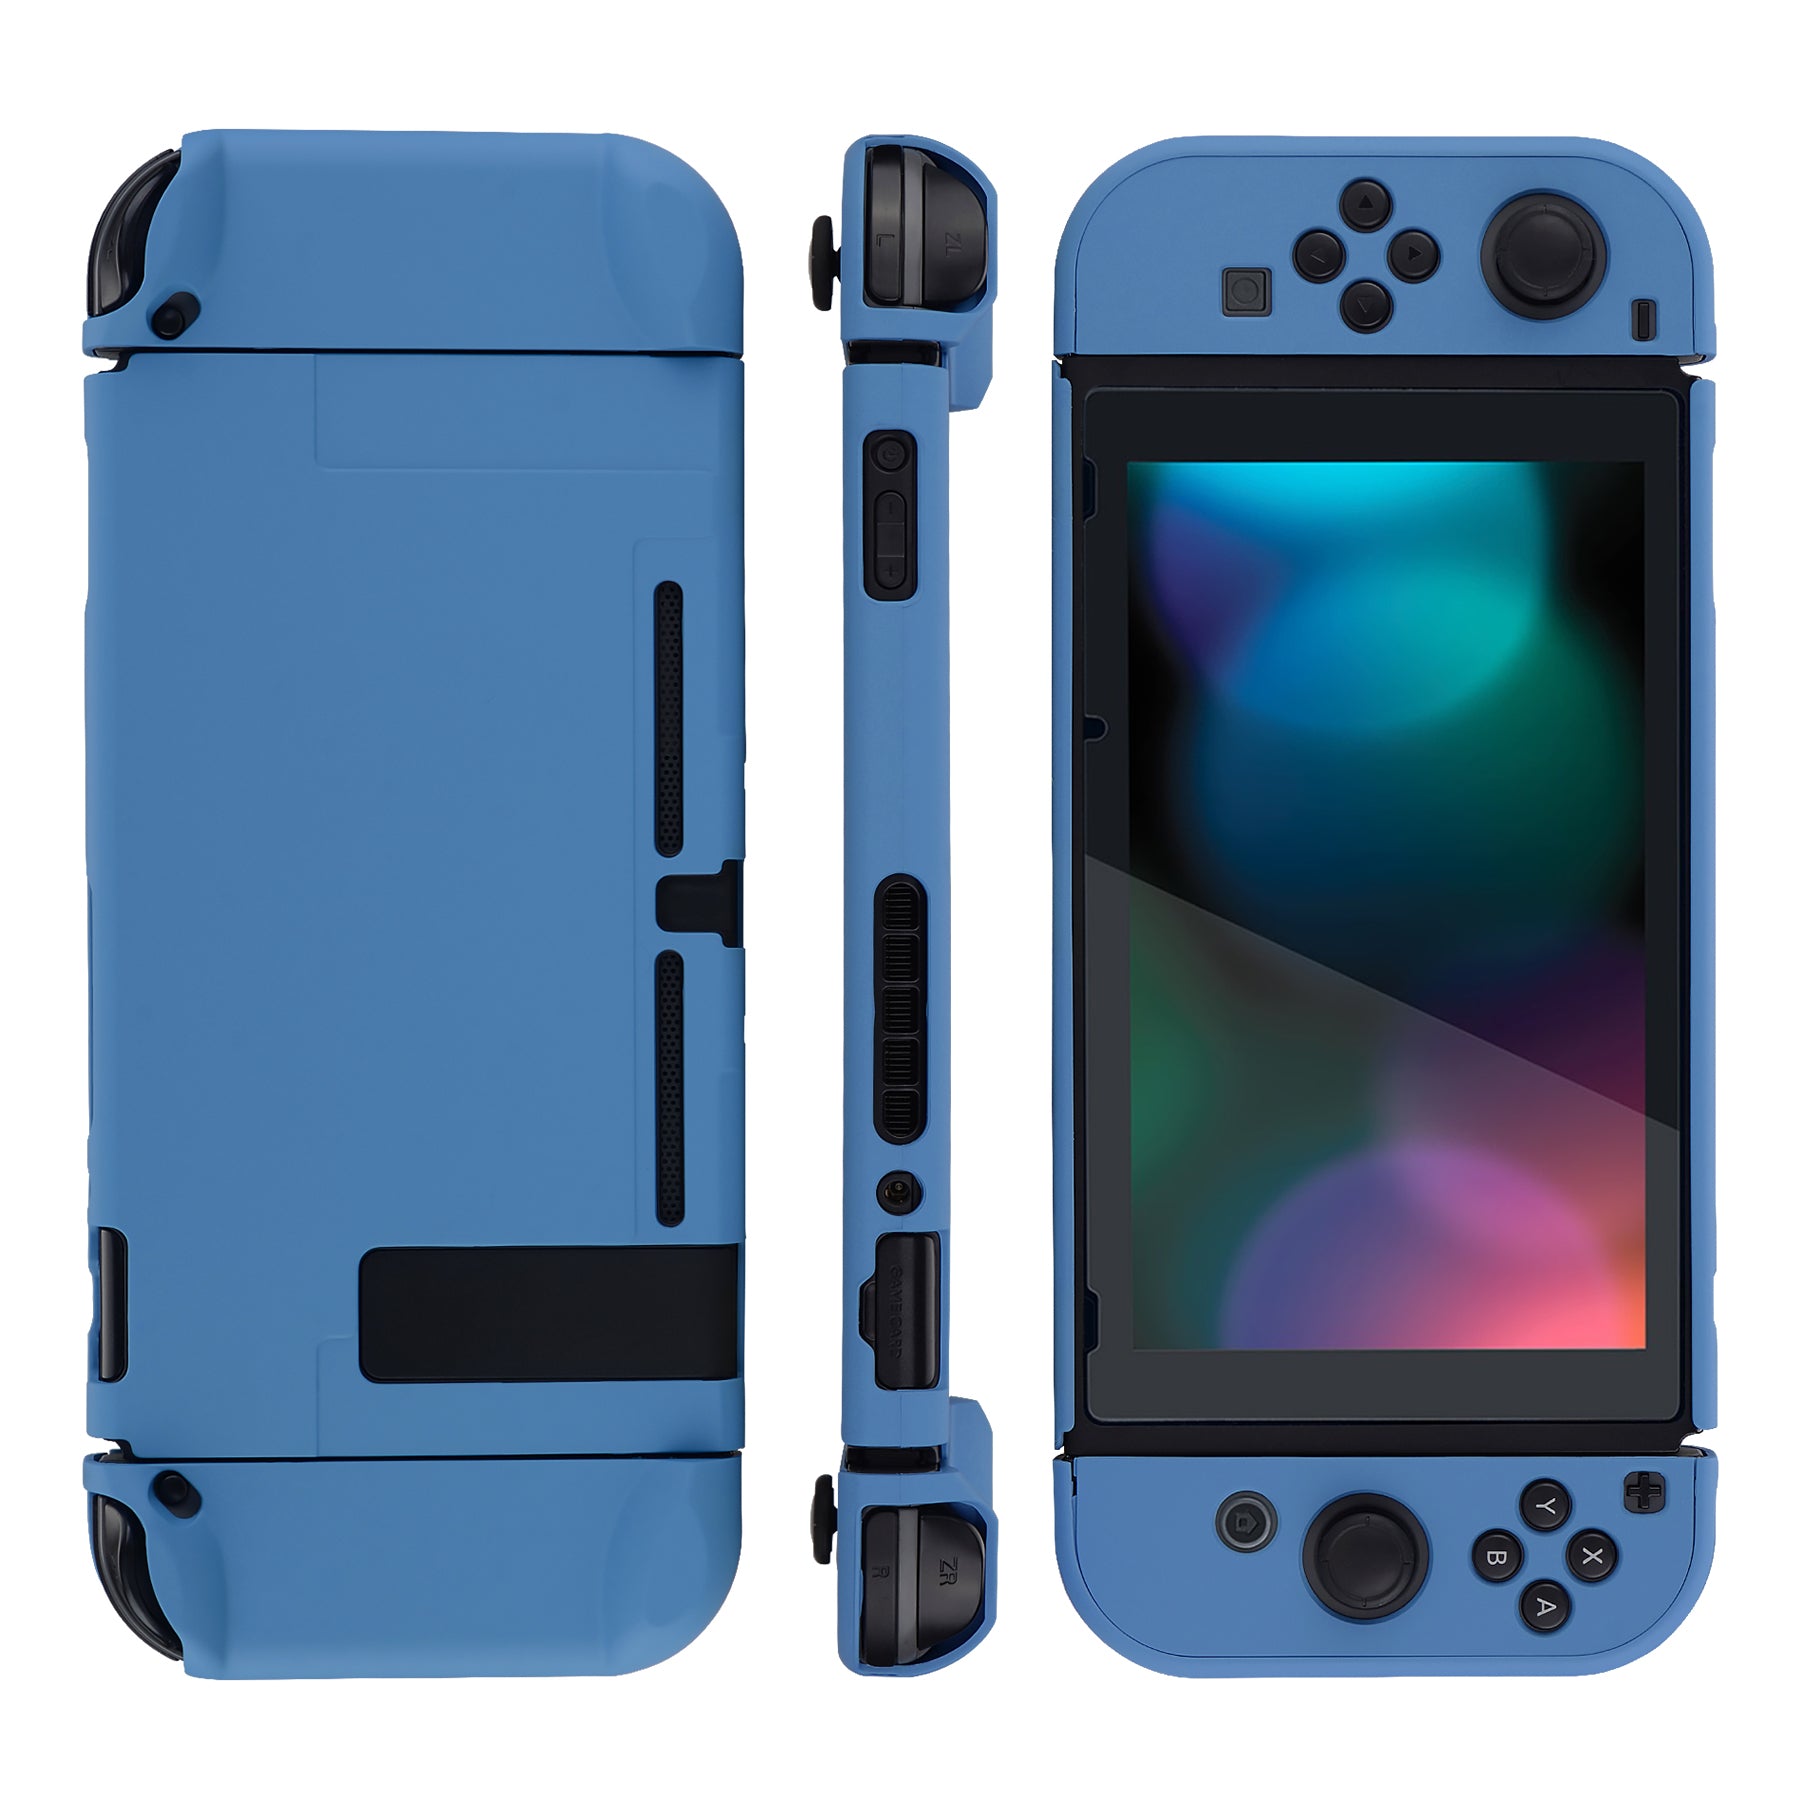 PlayVital Airforce Blue Back Cover for Nintendo Switch Console, NS Joycon Handheld Controller Separable Protector Hard Shell, Soft Touch Customized Dockable Protective Case for Nintendo Switch - NTP343 PlayVital